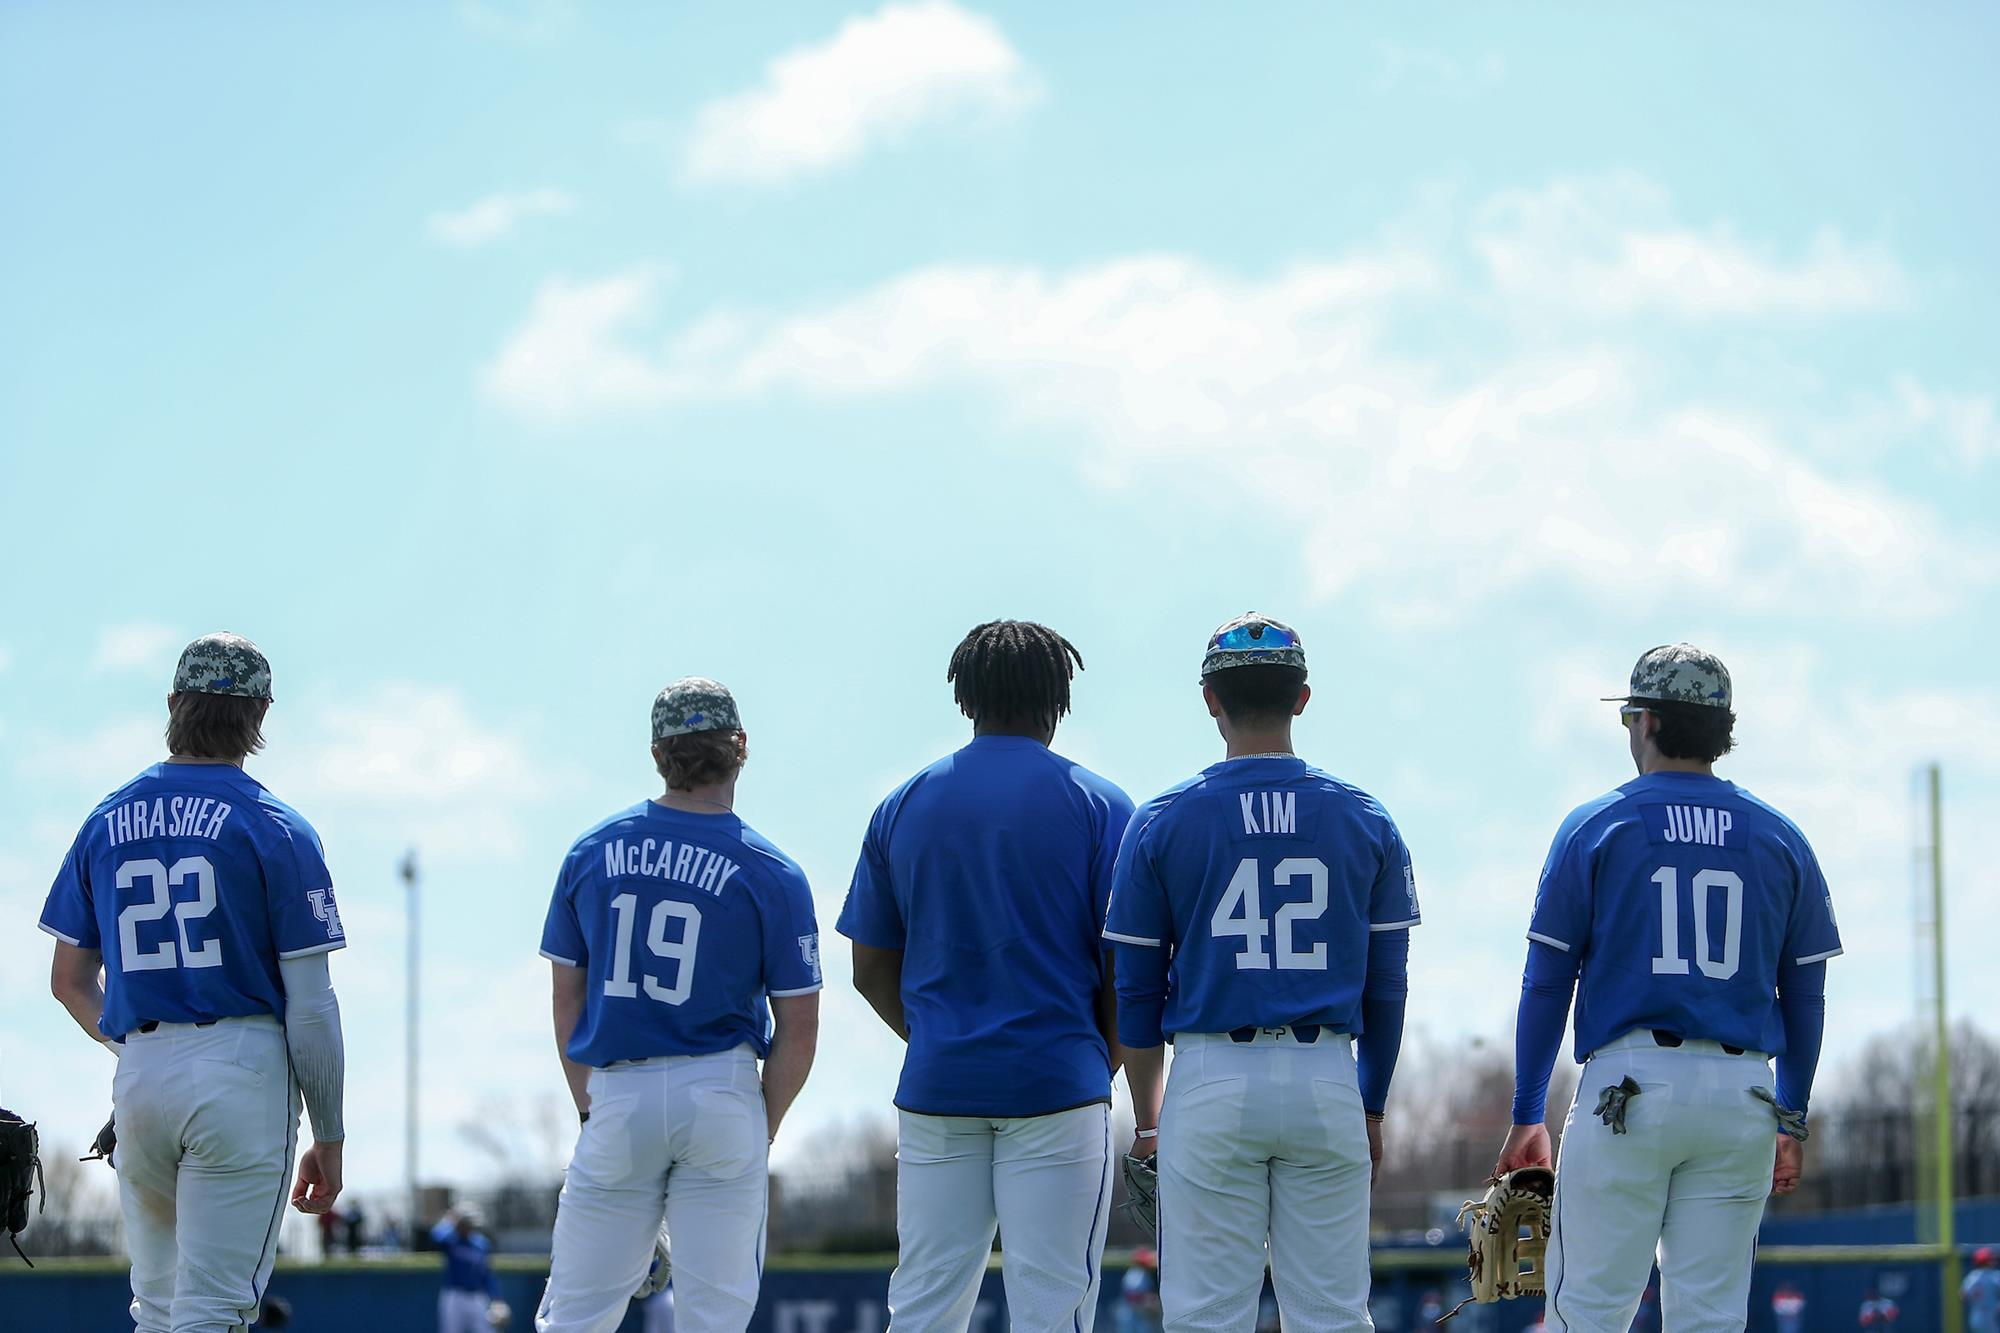 Eyes of Texas: Kentucky Travels to College Station